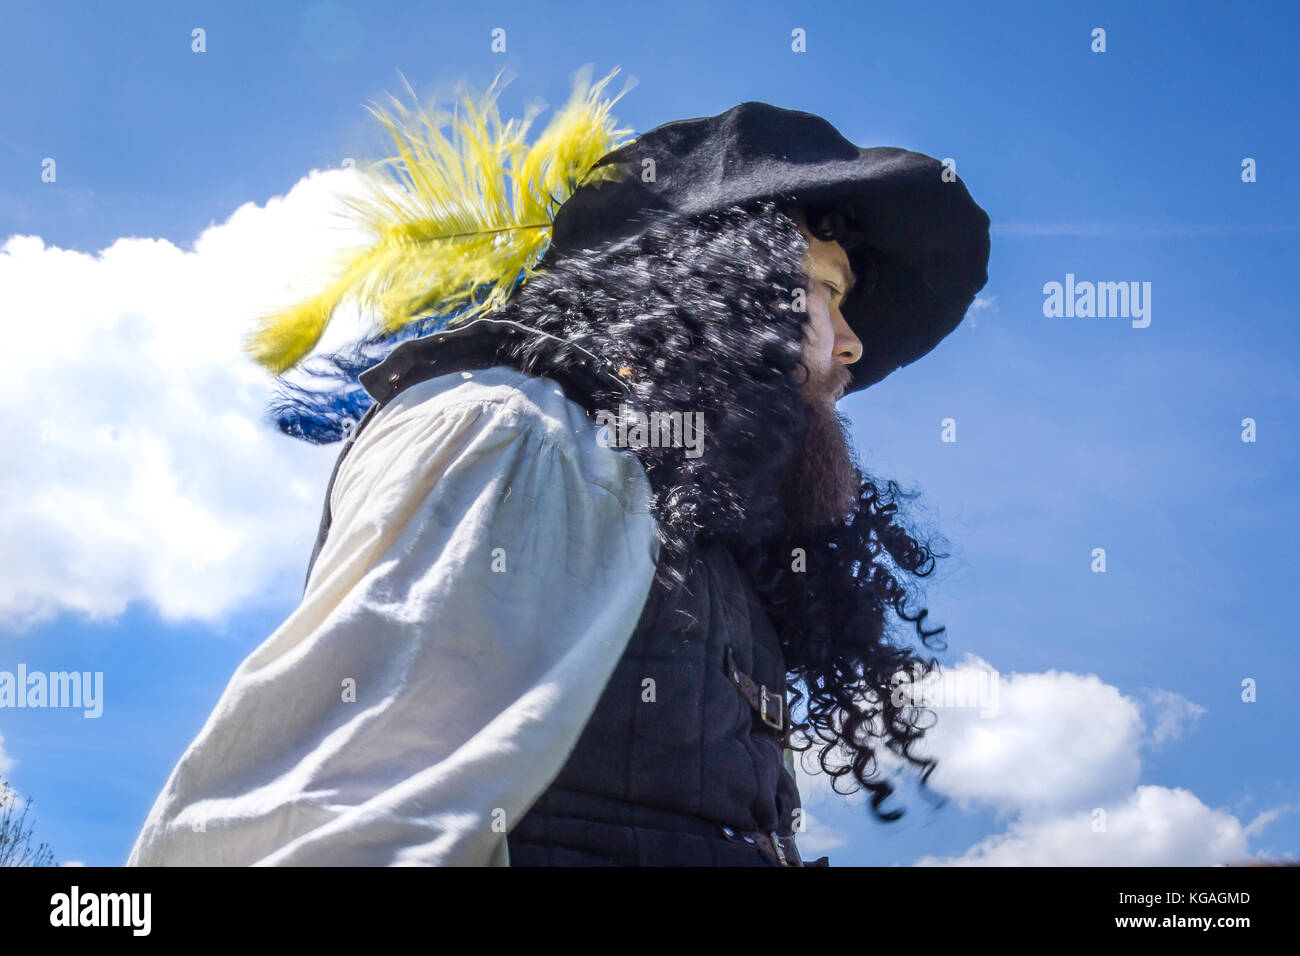 Musketeer with a wide hat and long curly hair against blue sky, Denmark, May 21, 2017 Stock Photo